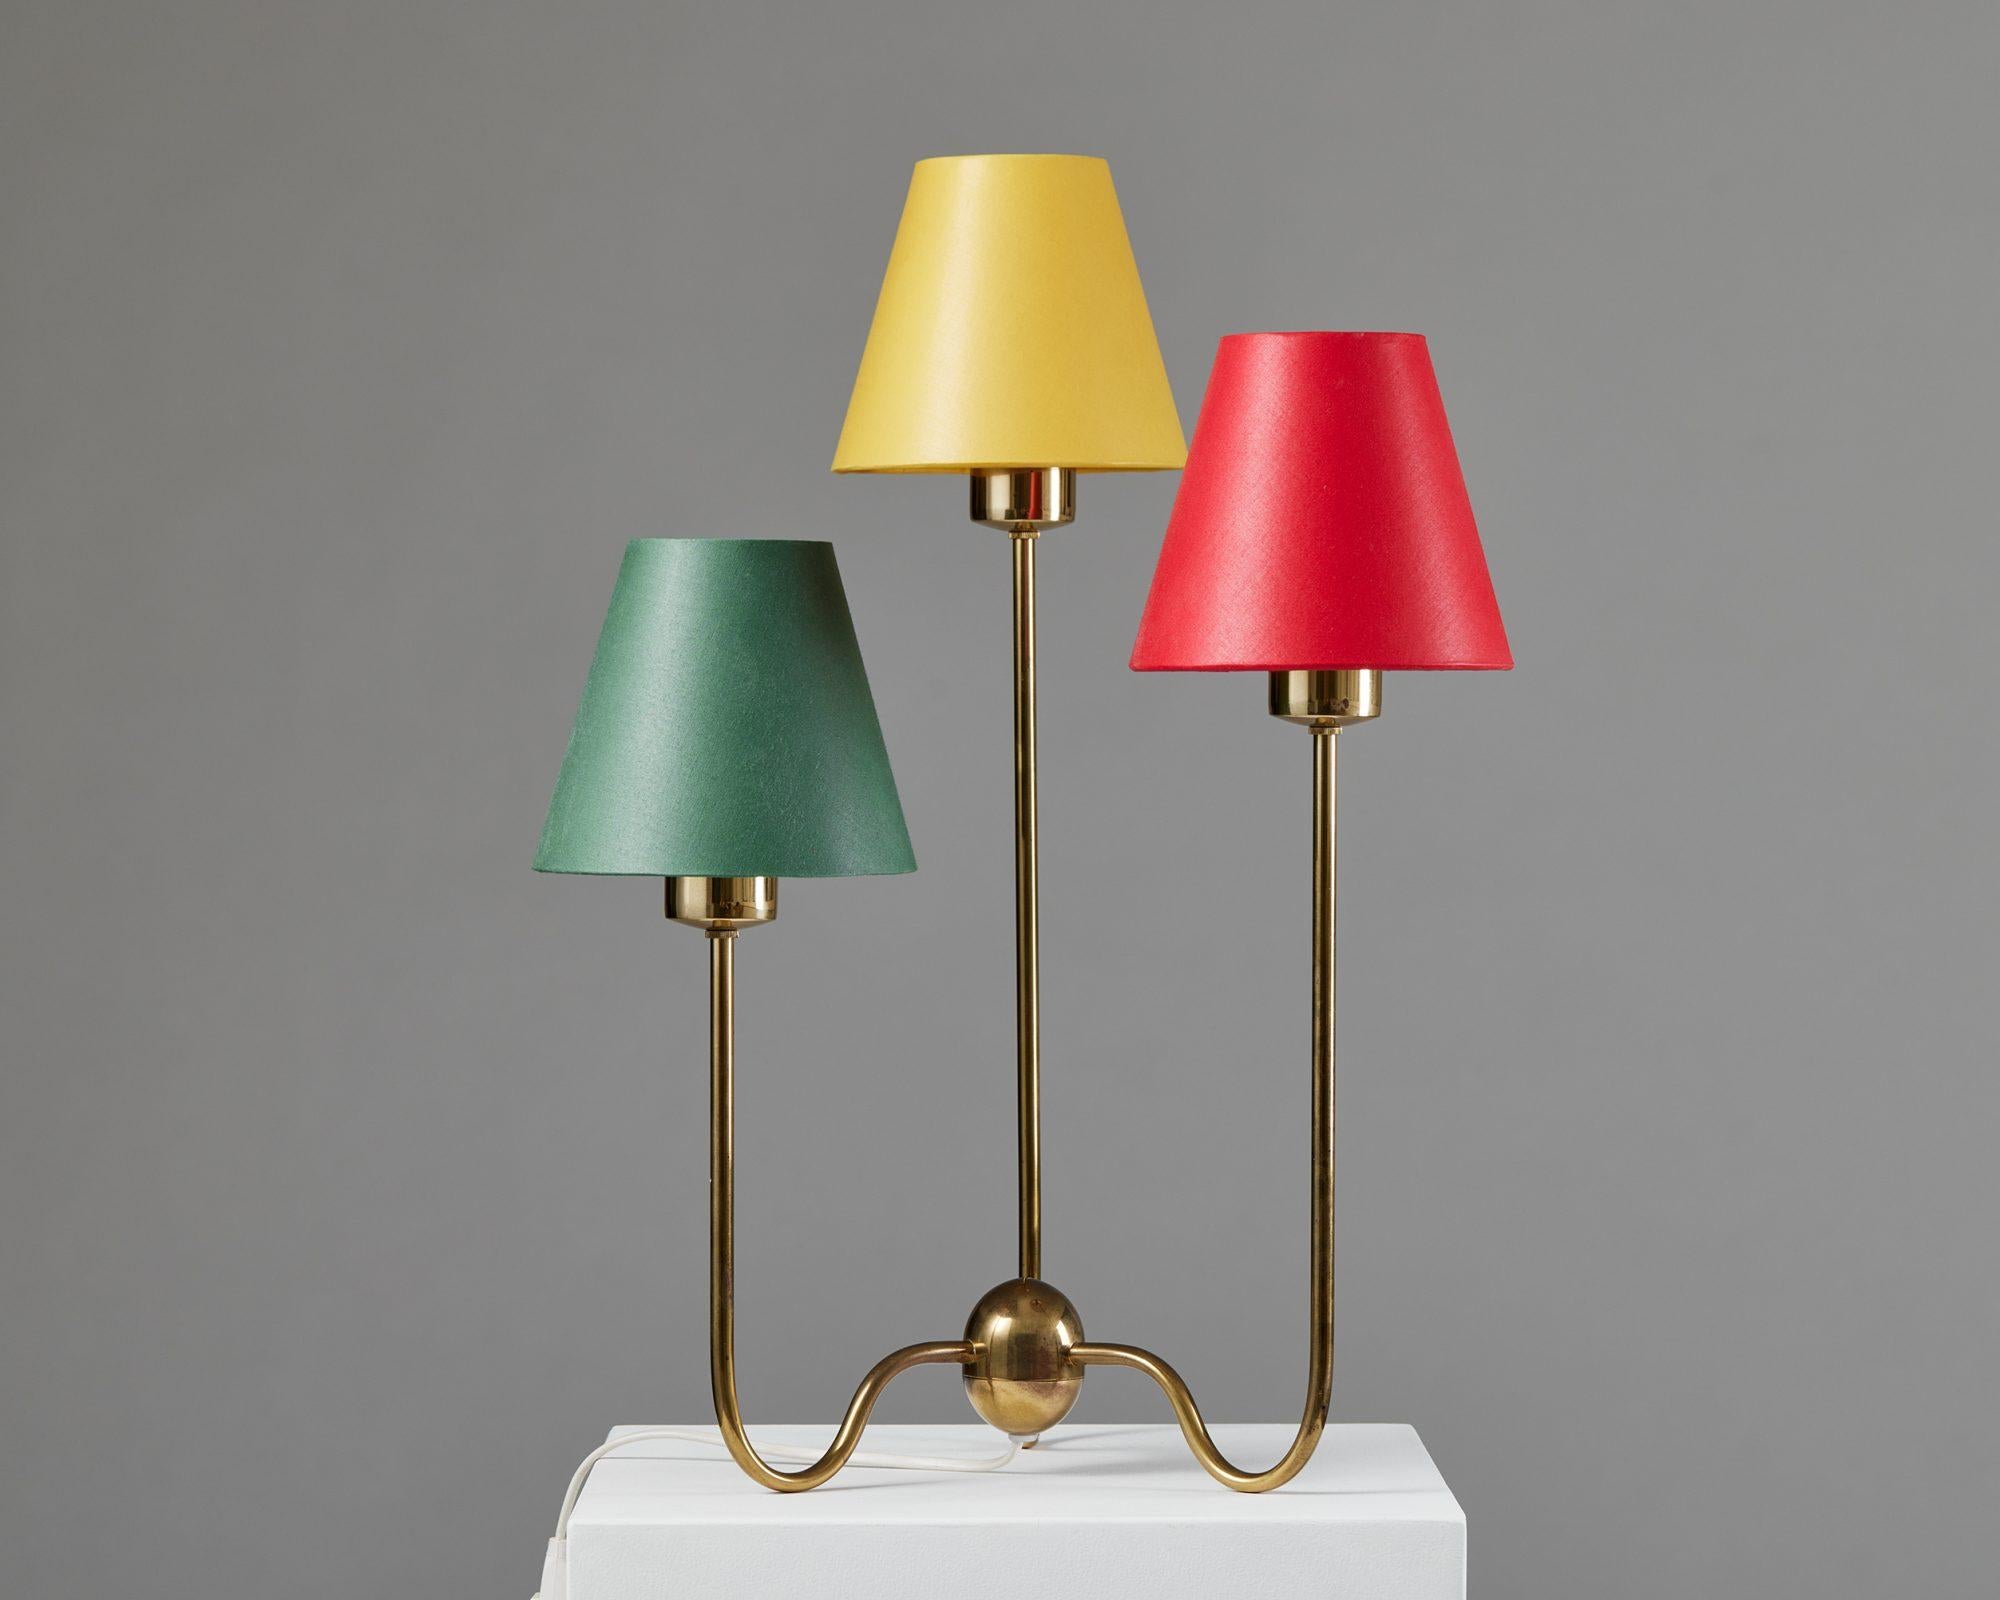 Table lamp model 2468 designed by Josef Frank for Svenskt Tenn,
Sweden, 1950s.

Brass with cotton shades.

Stamped.

Model 2468 is a delightful brass table lamp with three small shades in green, yellow, and red. The lamp has an elegant brass